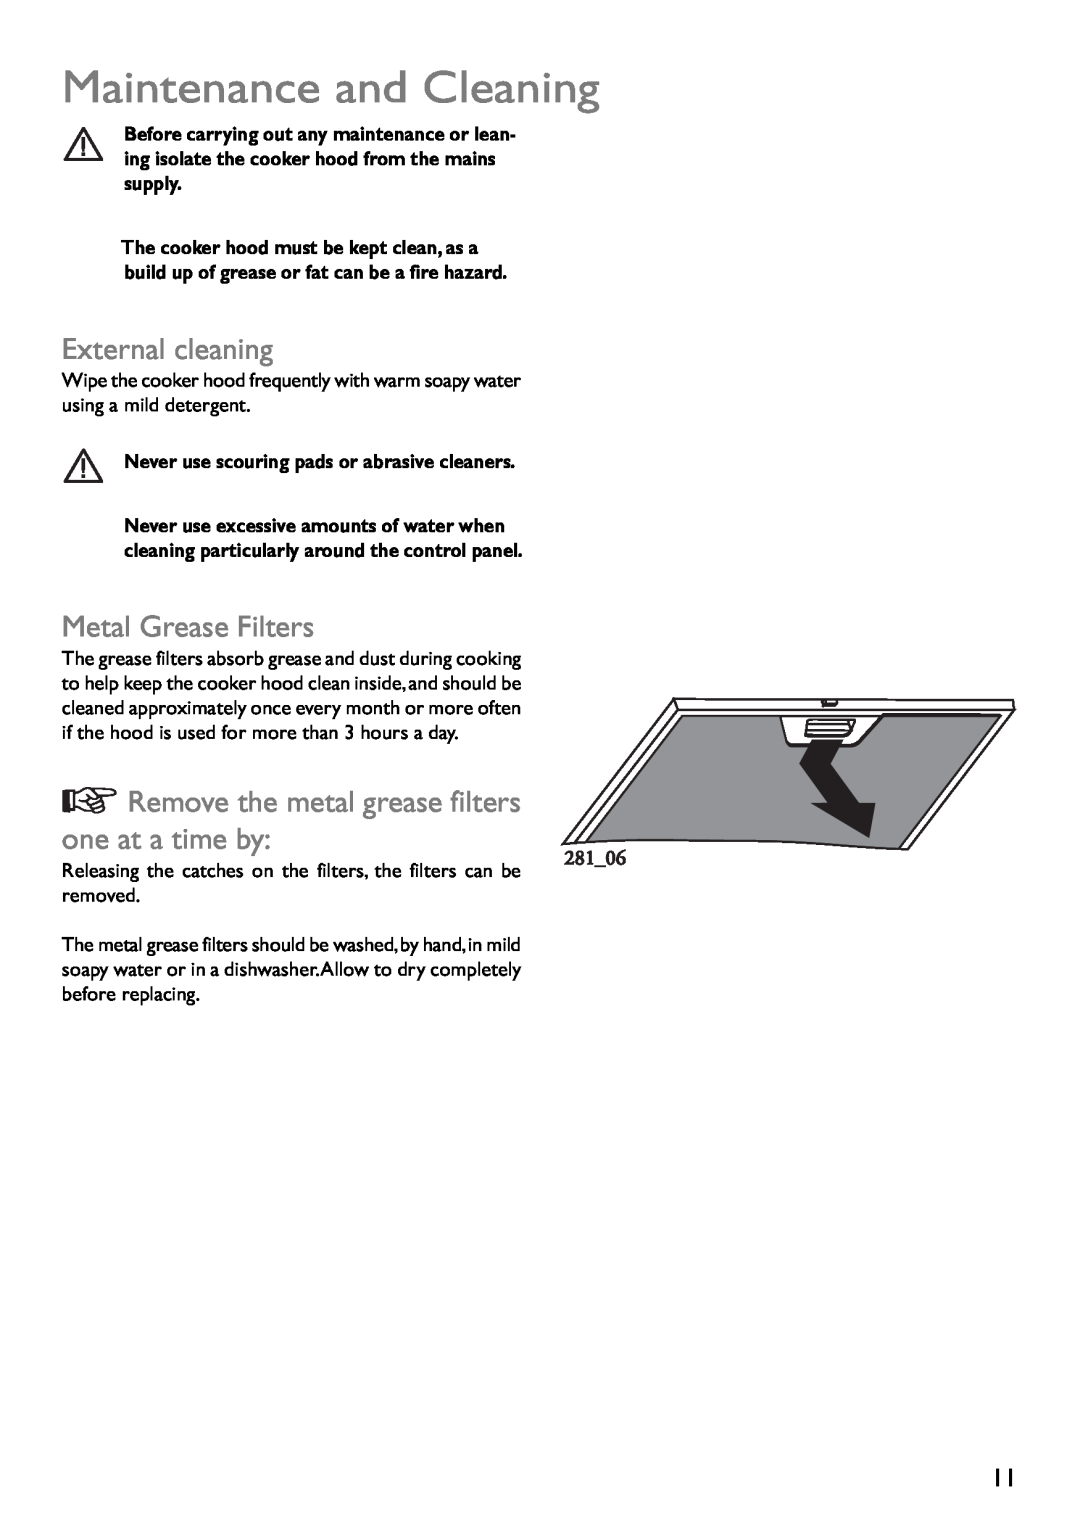 John Lewis JLBIHD601, JLBIHD902 instruction manual Maintenance and Cleaning, External cleaning, Metal Grease Filters 